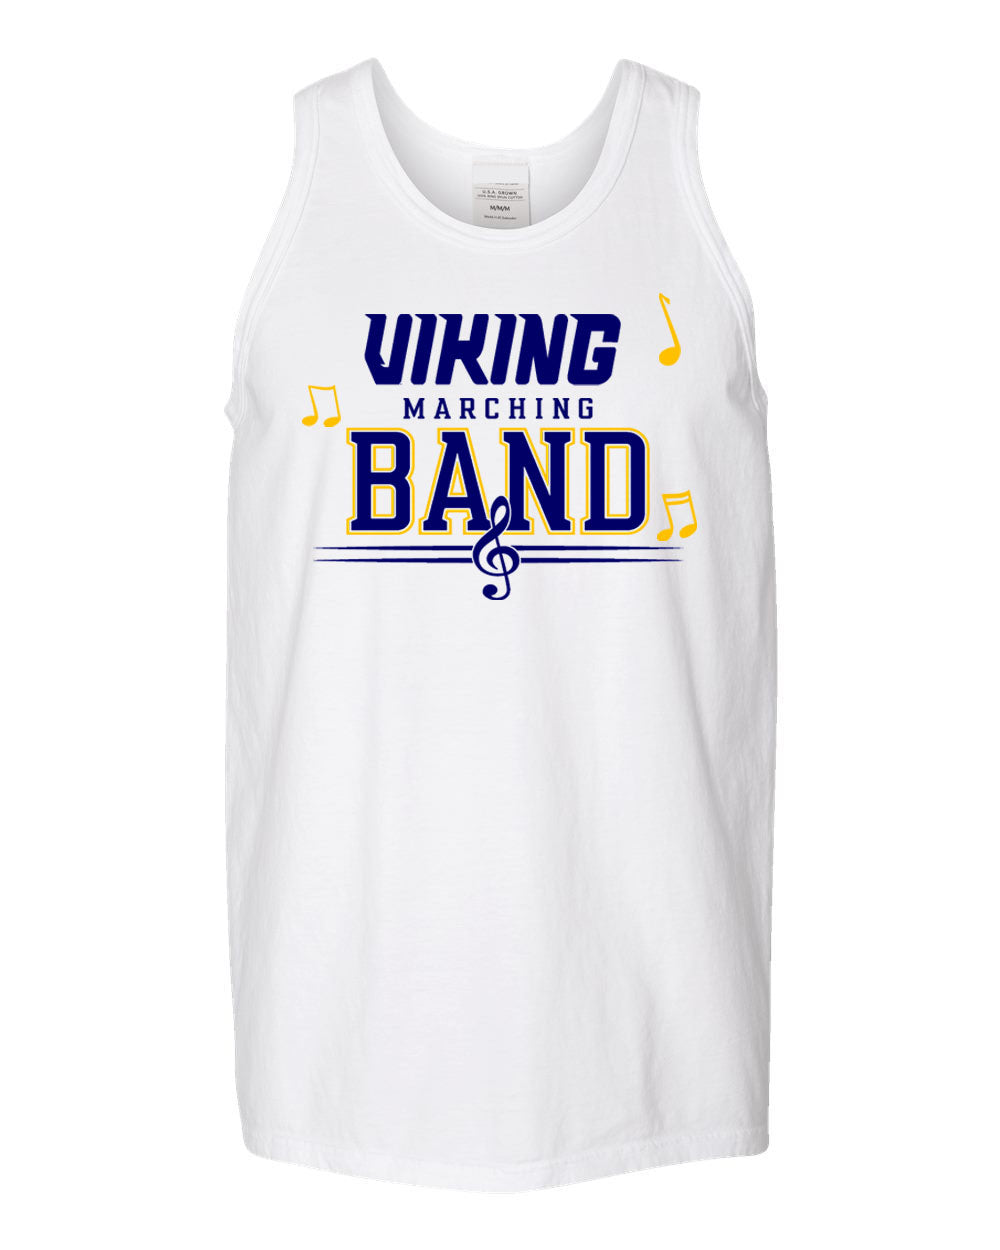 Vernon Marching Band design 5 Muscle Tank Top